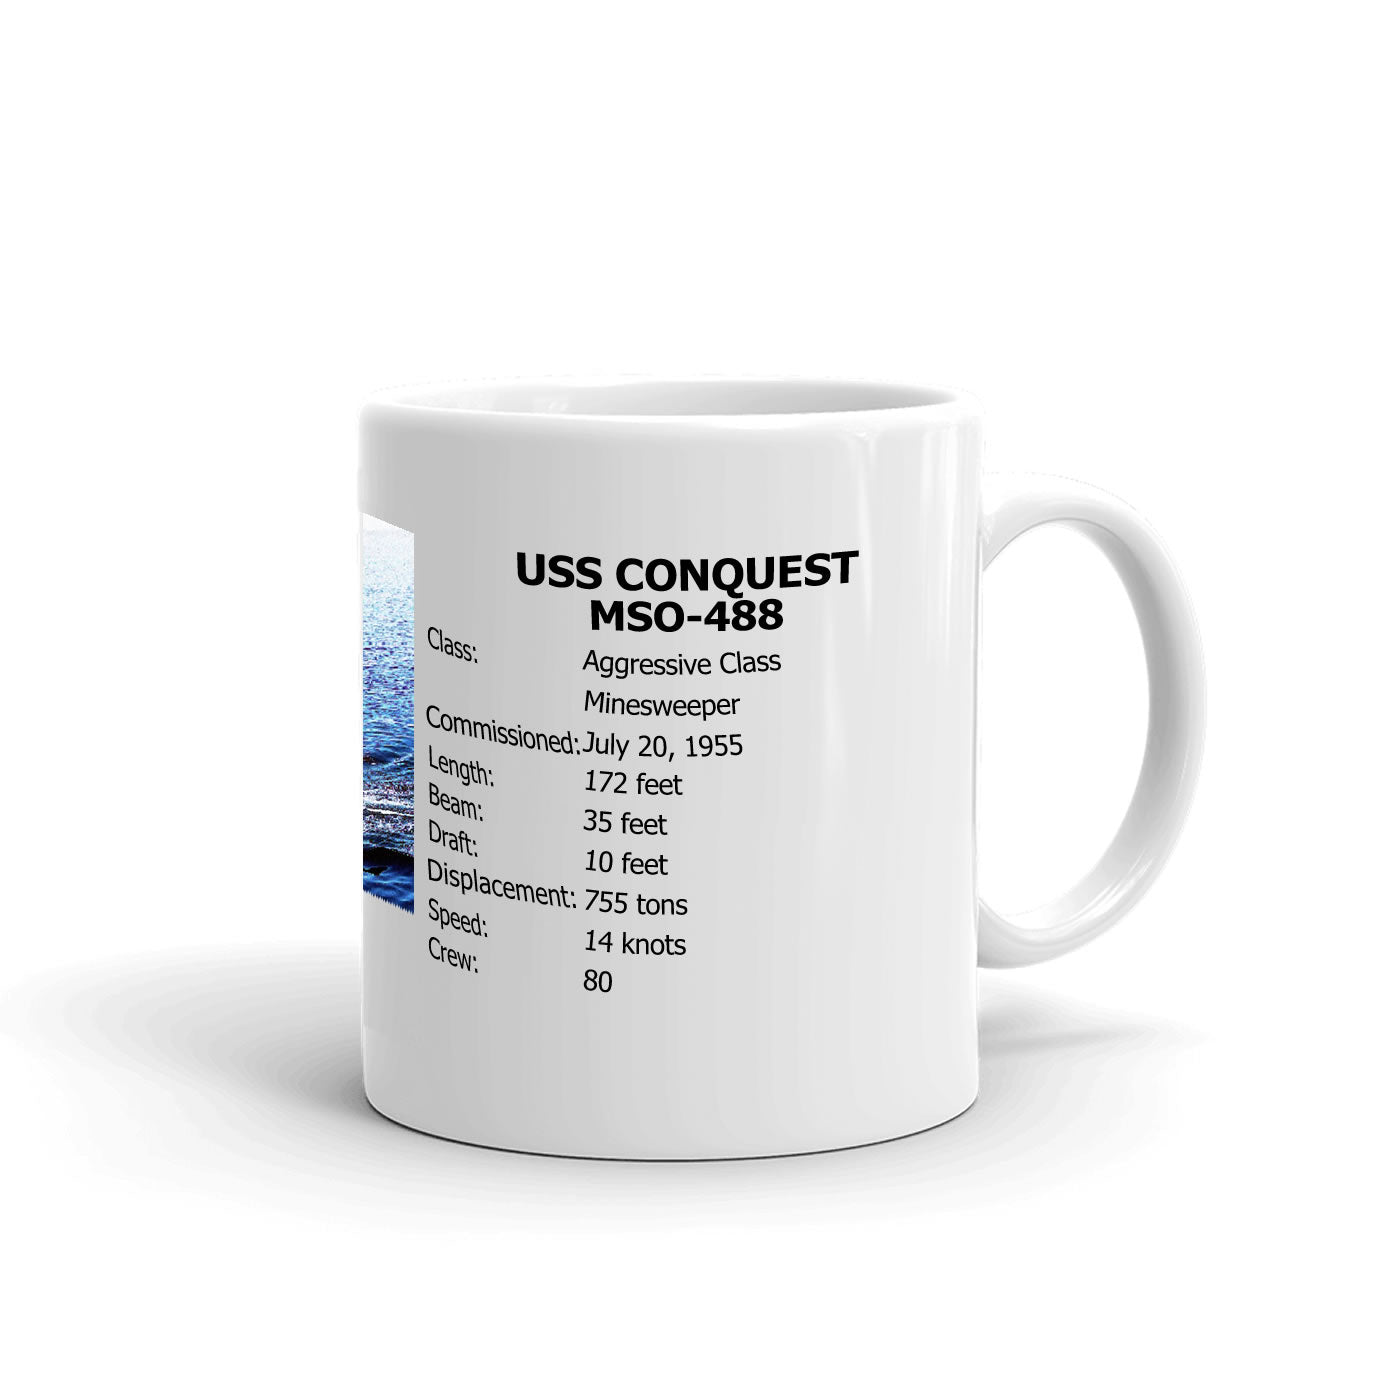 USS Conquest MSO-488 Coffee Cup Mug Right Handle